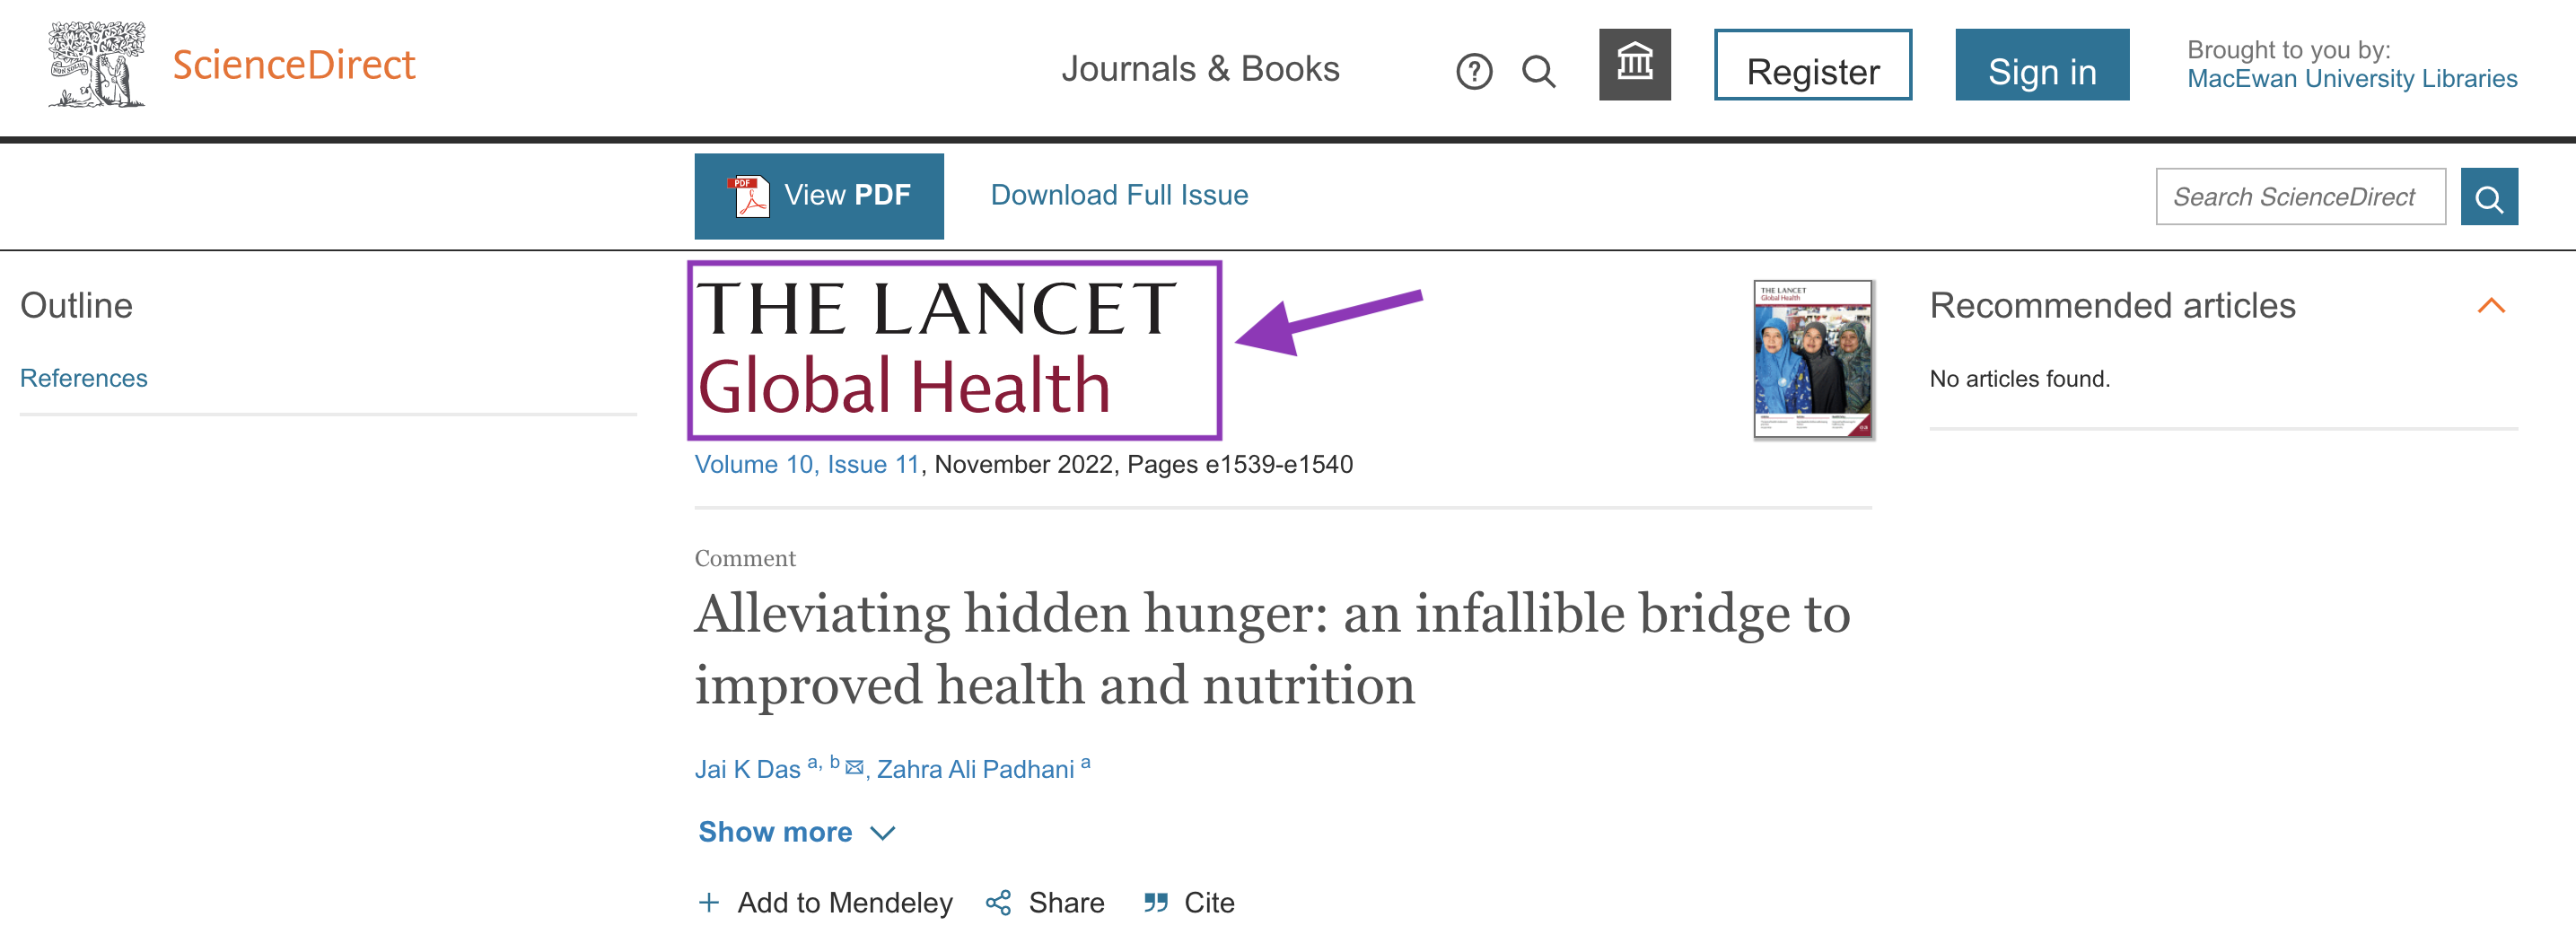 Image of The Lancet Global Health journal website pointing out the title.